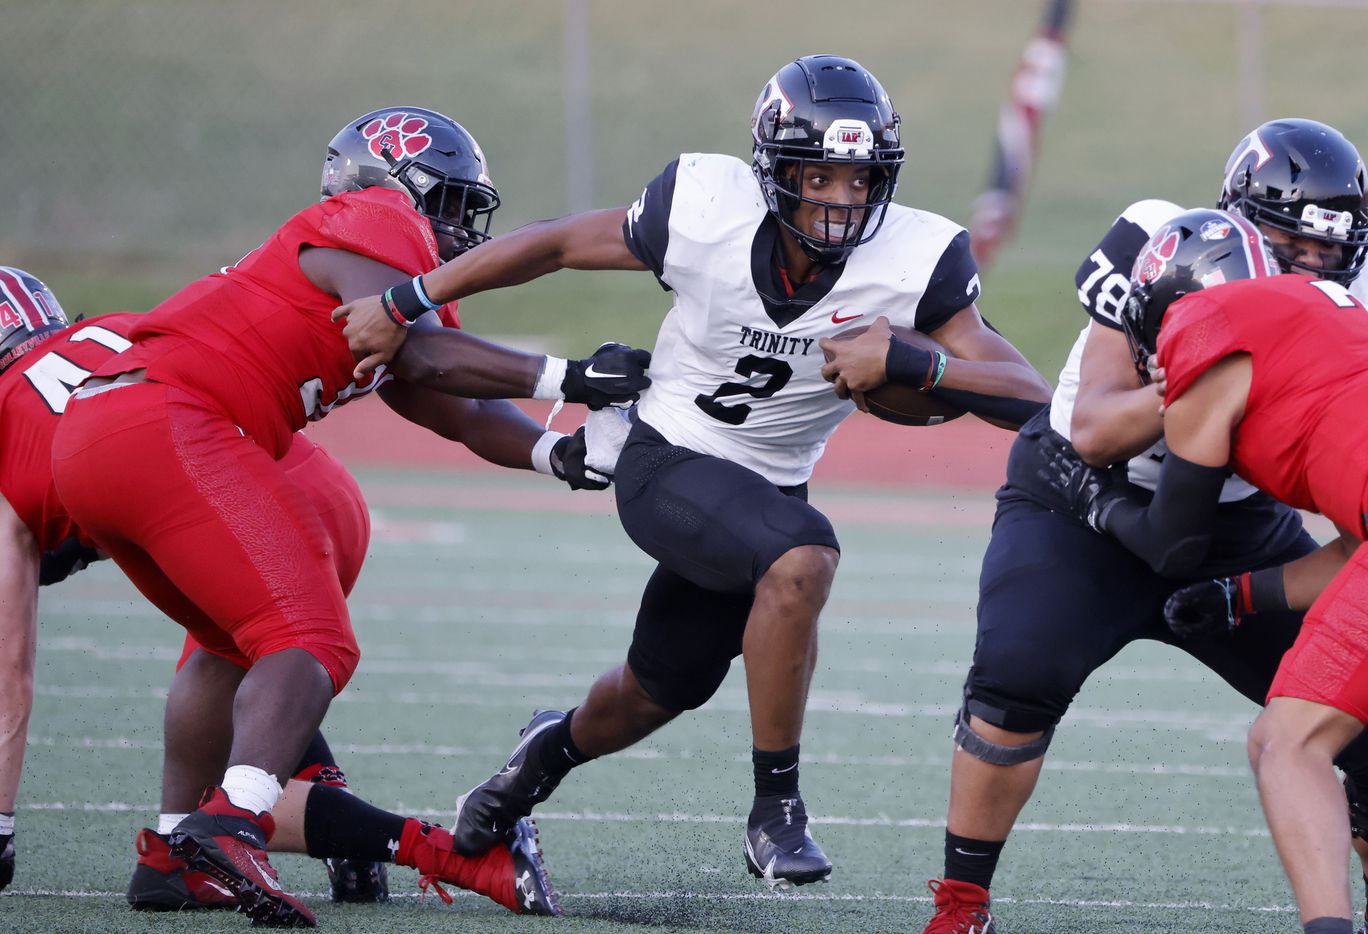 Colleyville defender Elijah Omar (left) tries to stop Euless Trinity quarterback Ollie Gordon (2) during the first half of a high school football game in Grapevine, Texas on Friday, Sept. 10, 2021.